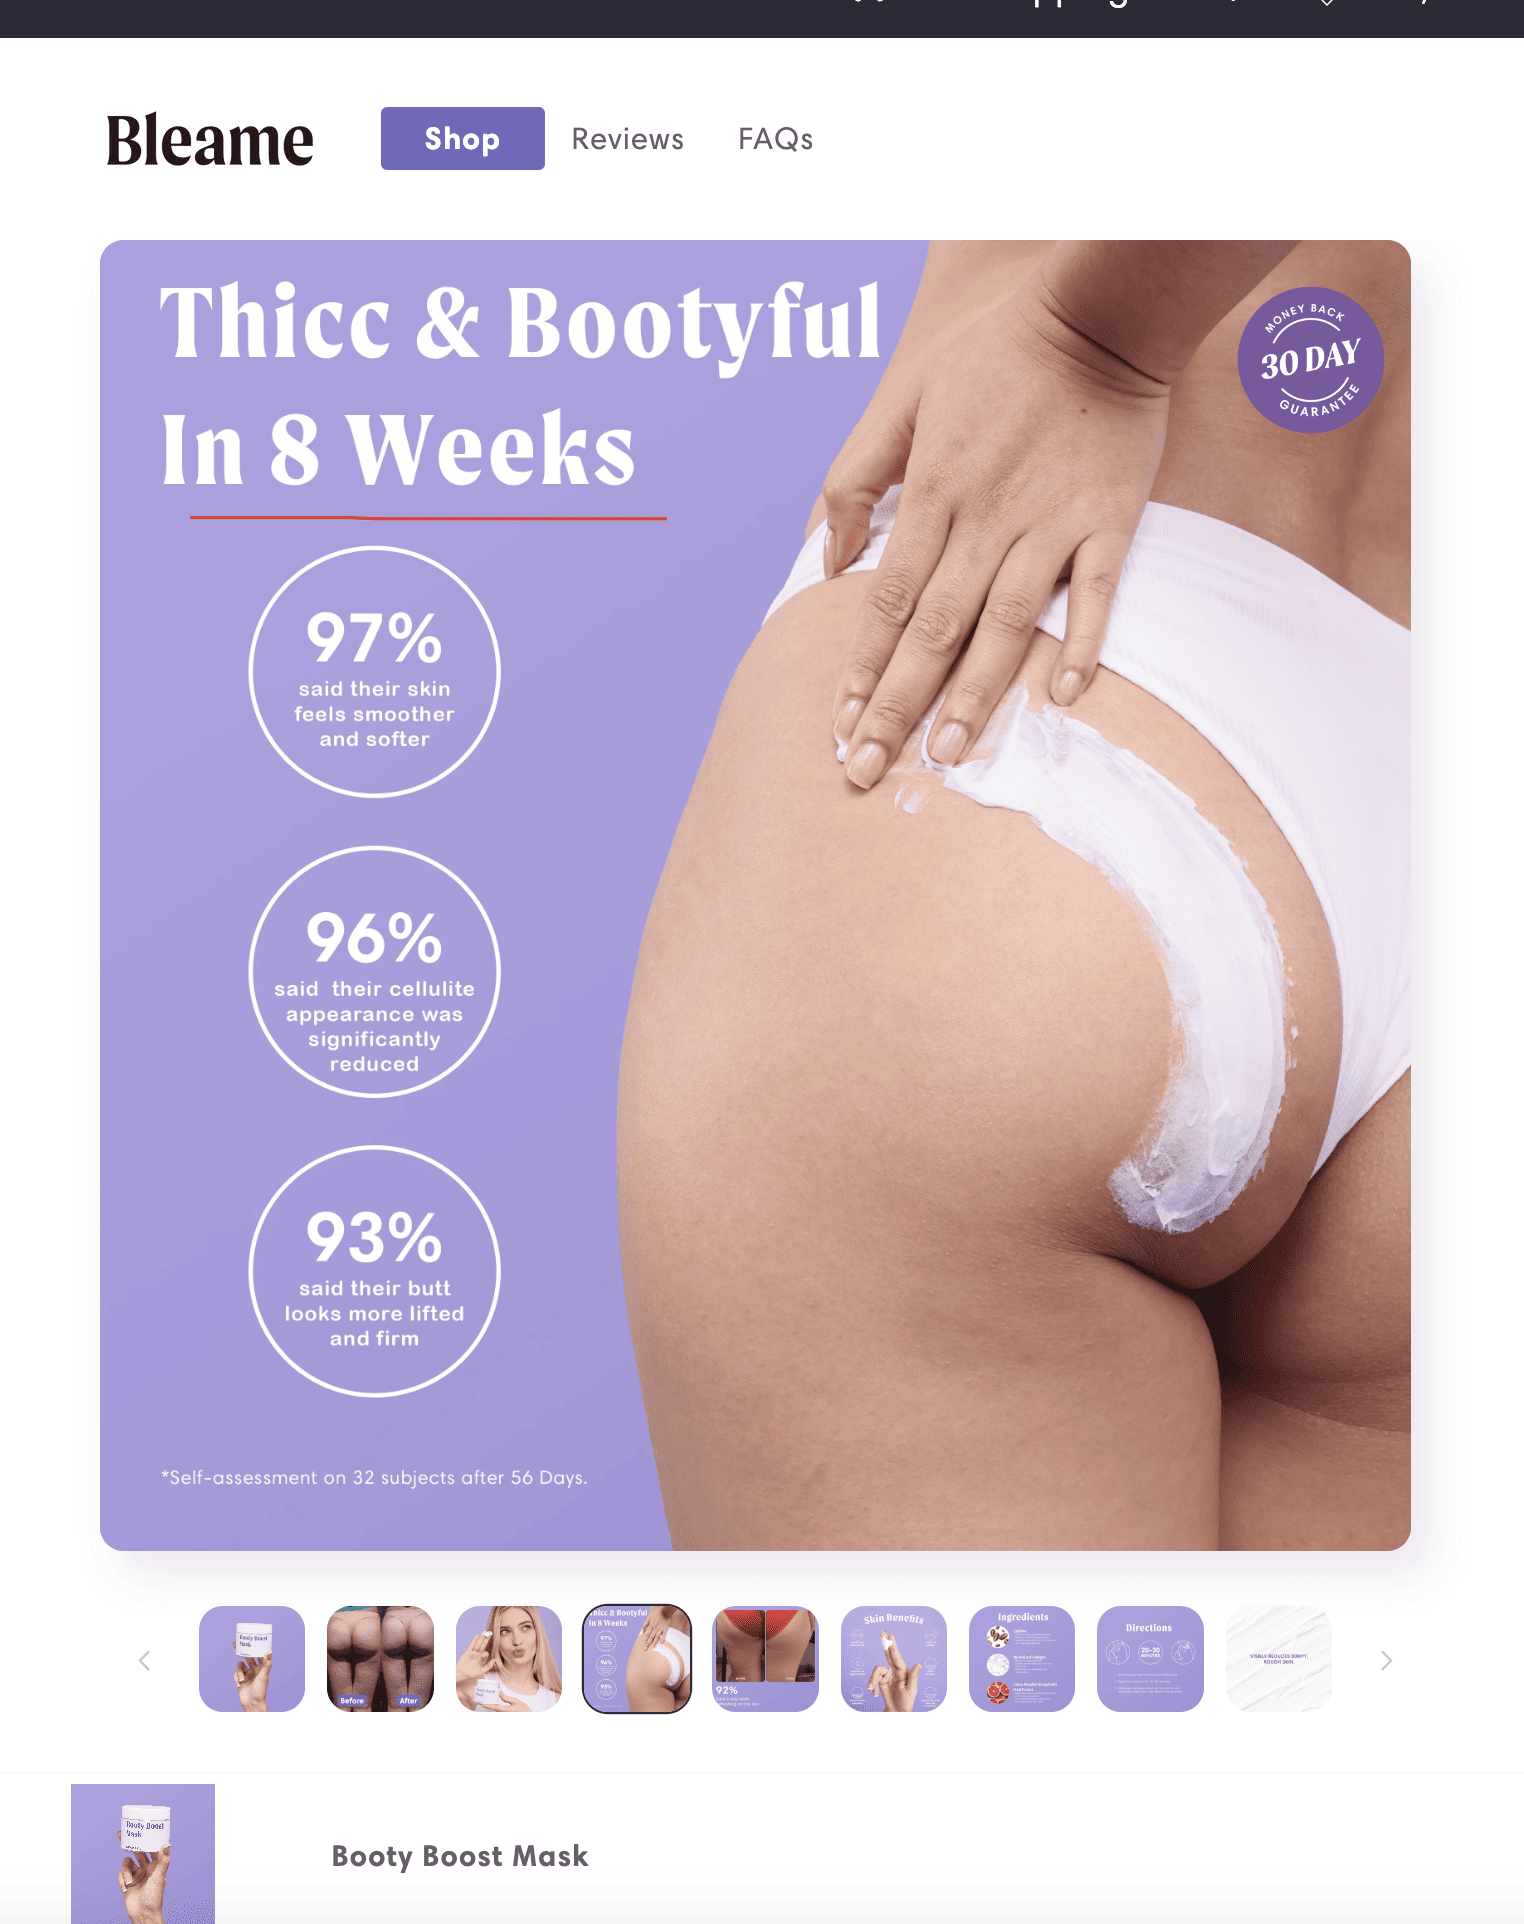 screenshot showing booty mask results in 8 weeks.